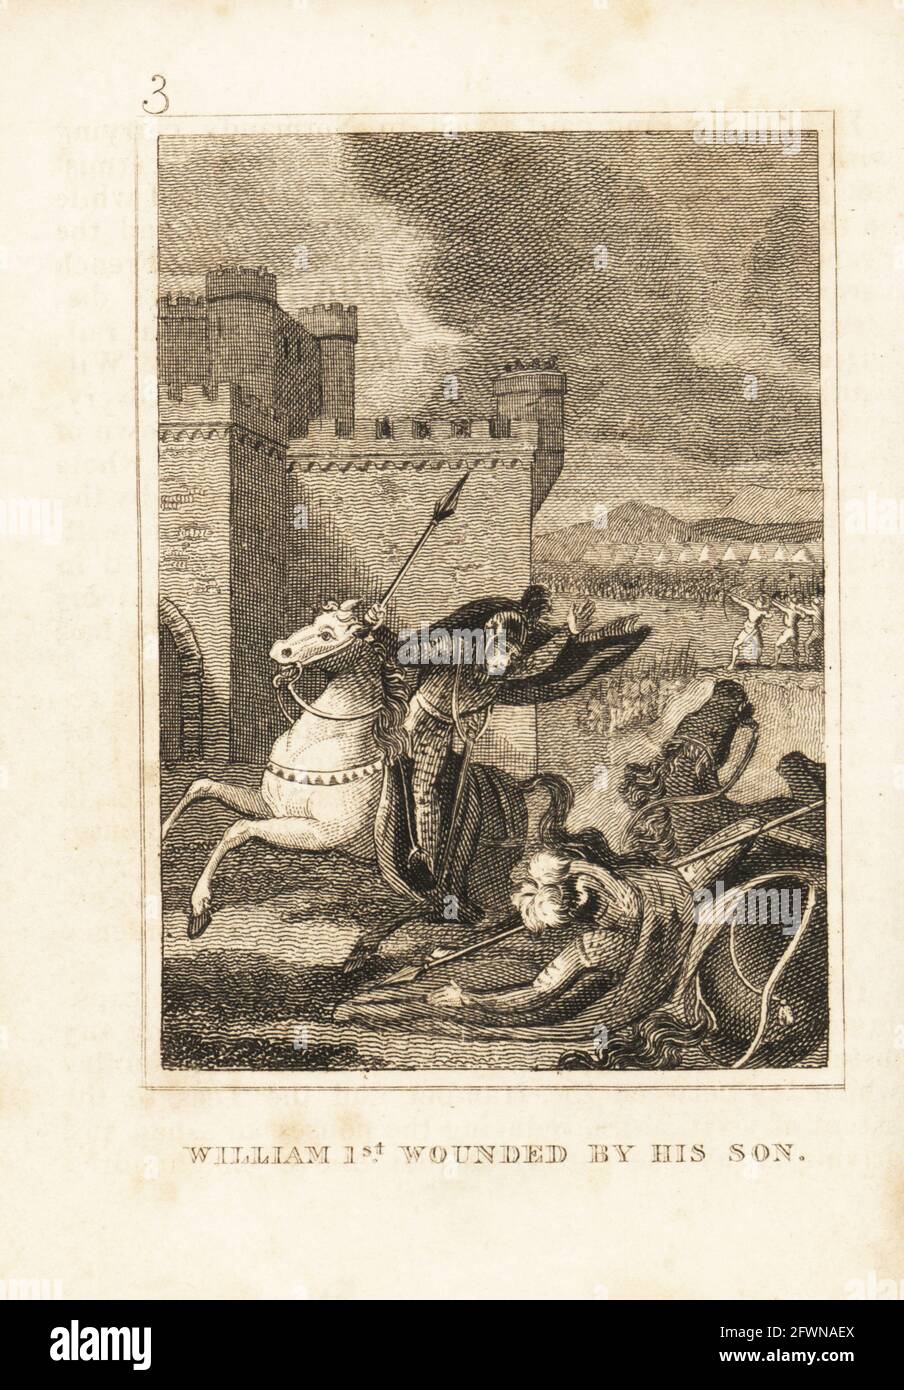 WIlliam the Conqueror knocked off his horse by his son Robert Curthose, Siege of Gerberoy Fortress, 1079. William I wounded by his son. Copperplate engraving from M. A. Jones’ History of England from Julius Caesar to George IV, G. Virtue, 26 Ivy Lane, London, 1836. Stock Photo